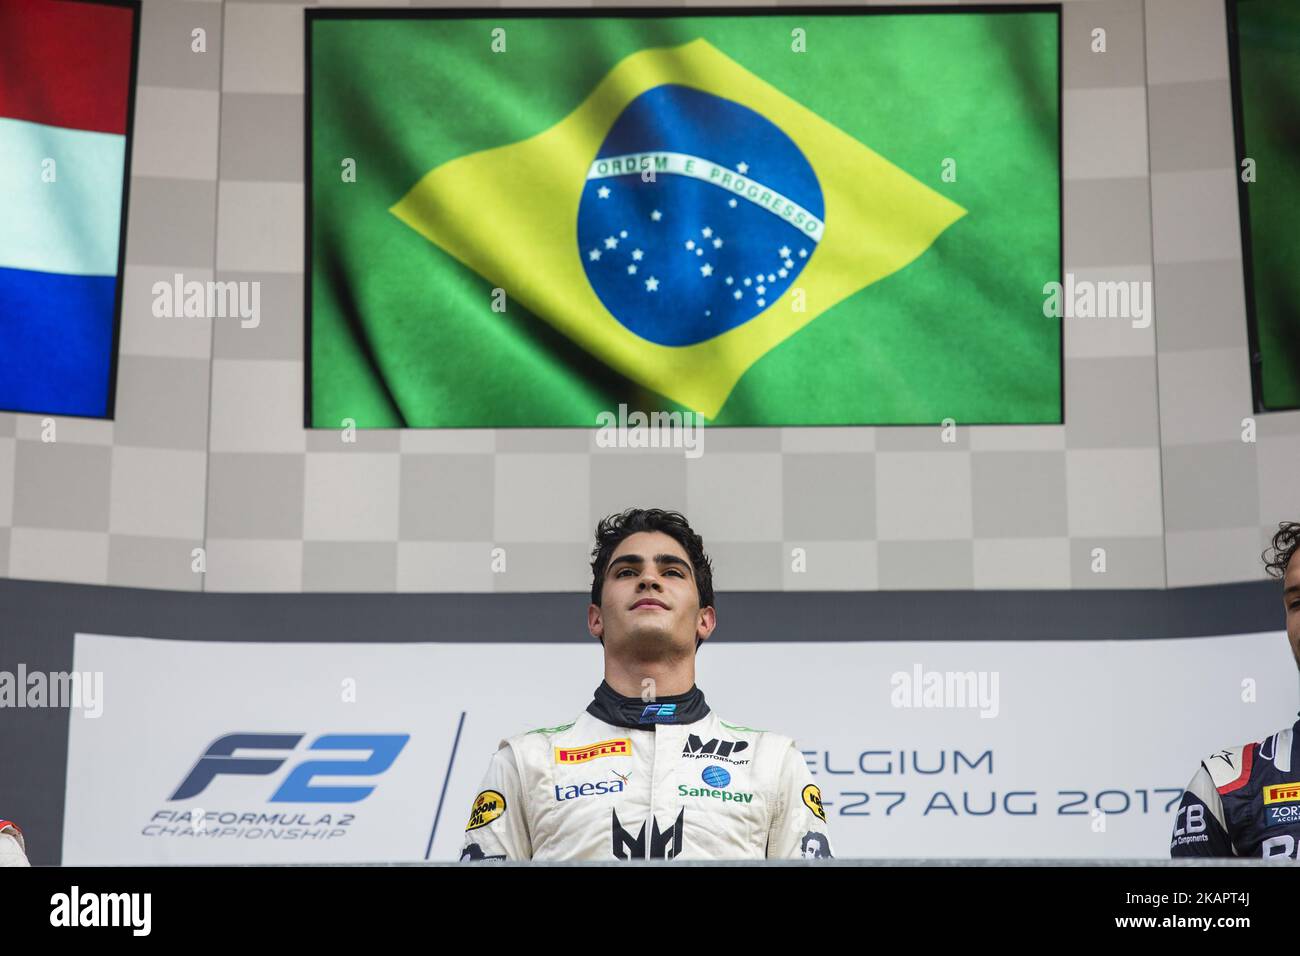 14 SETTE CAMARA Sergio from Brasil of MP Motorsport celebrating his first victory in F2 during the FIA Formula 2 championship at Circuit de Spa-Francorchamps on August 27, 2017 in Spa, Belgium. (Photo by Xavier Bonilla/NurPhoto) Stock Photo